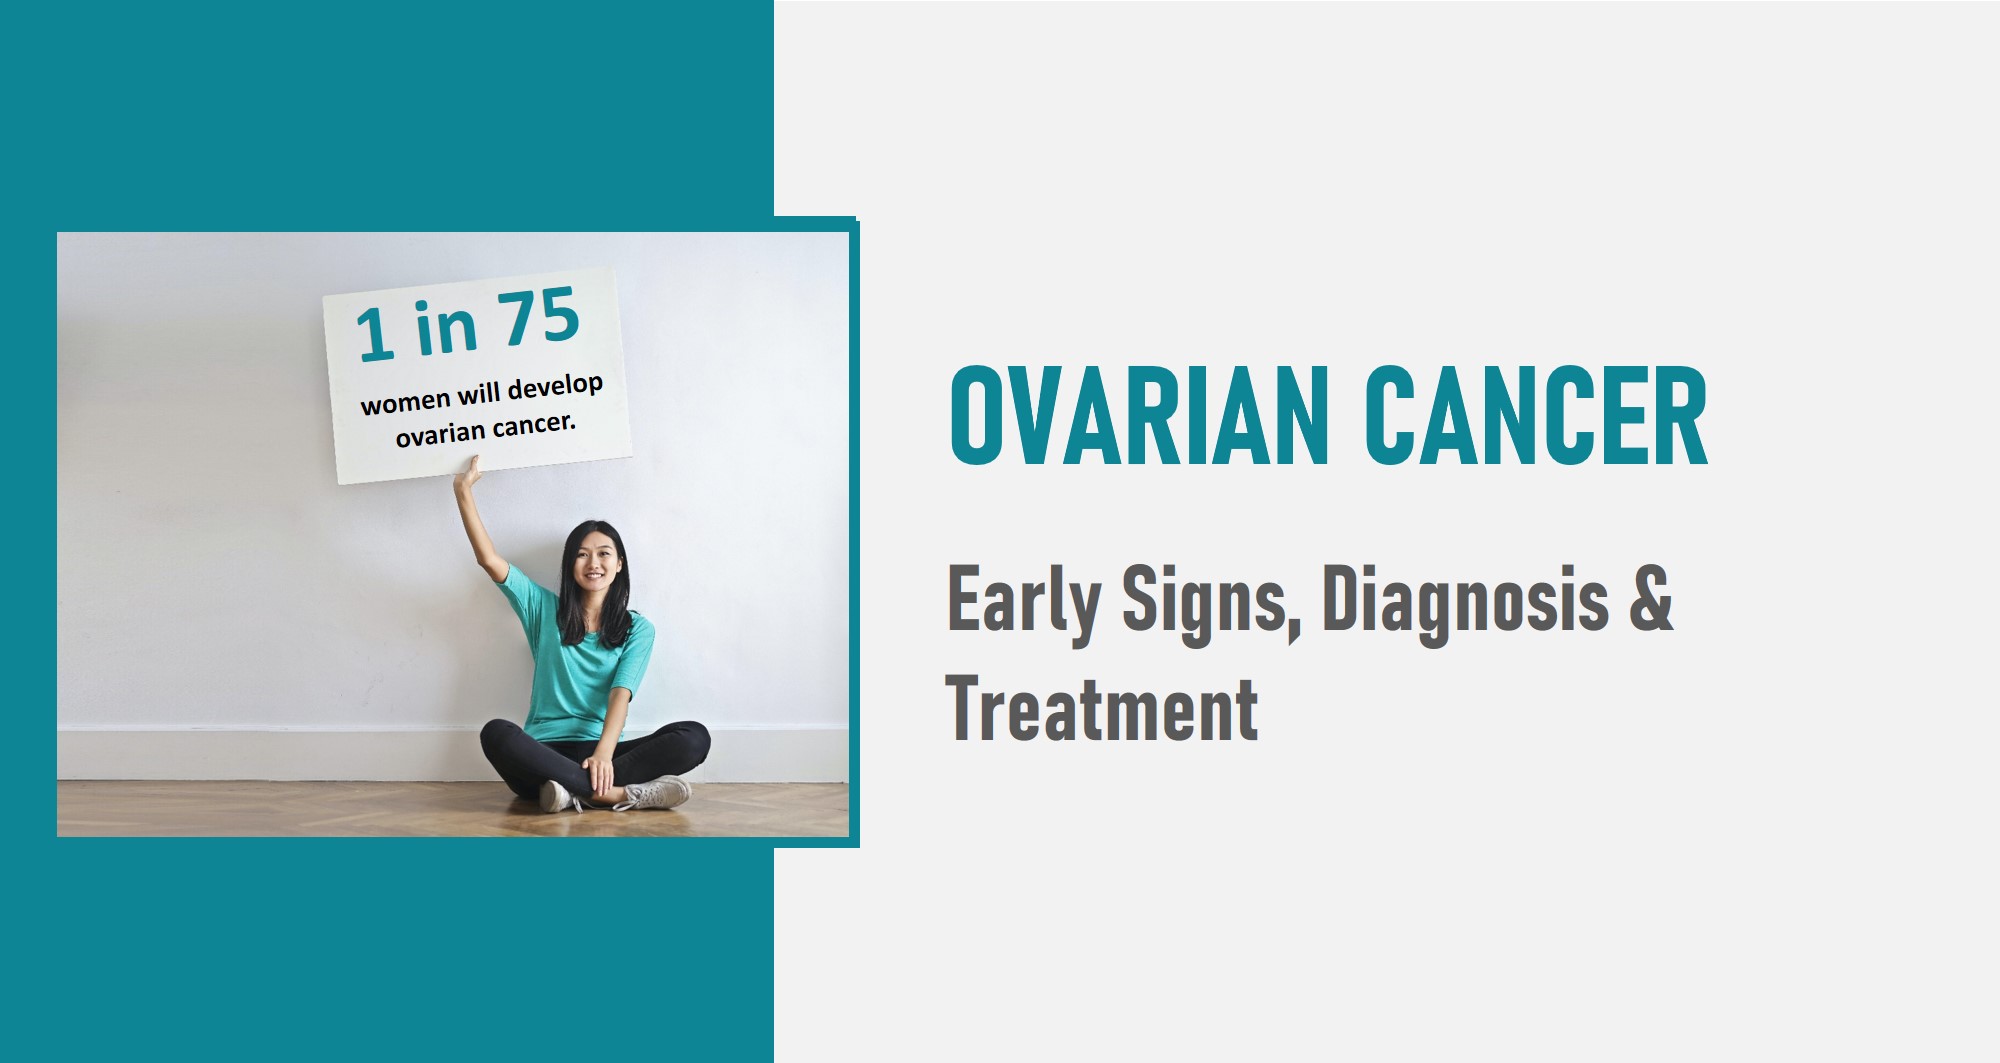 Ovarian Cancer – Early Signs, Diagnosis & Treatment